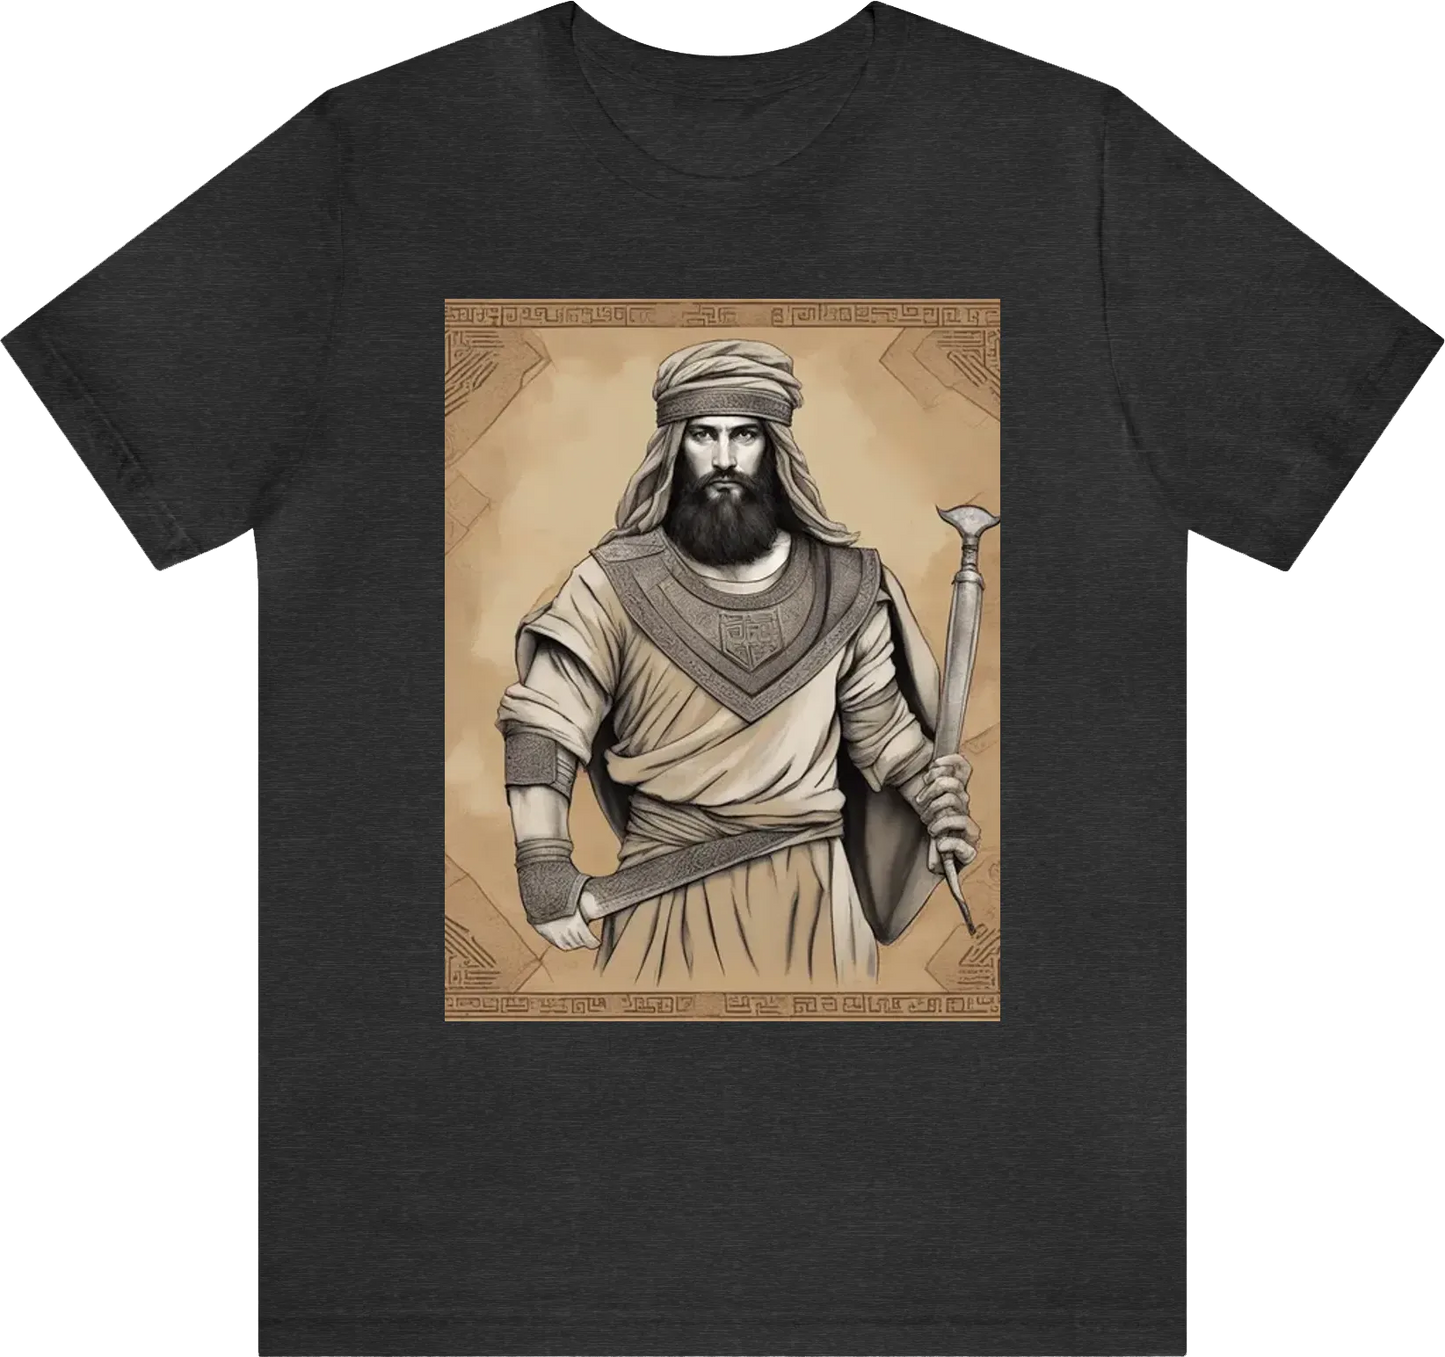 Create a hebrew shirt with warrior of Yeshua in hebrew writing and the image if an ancient hebrew warrior in renaissance style art